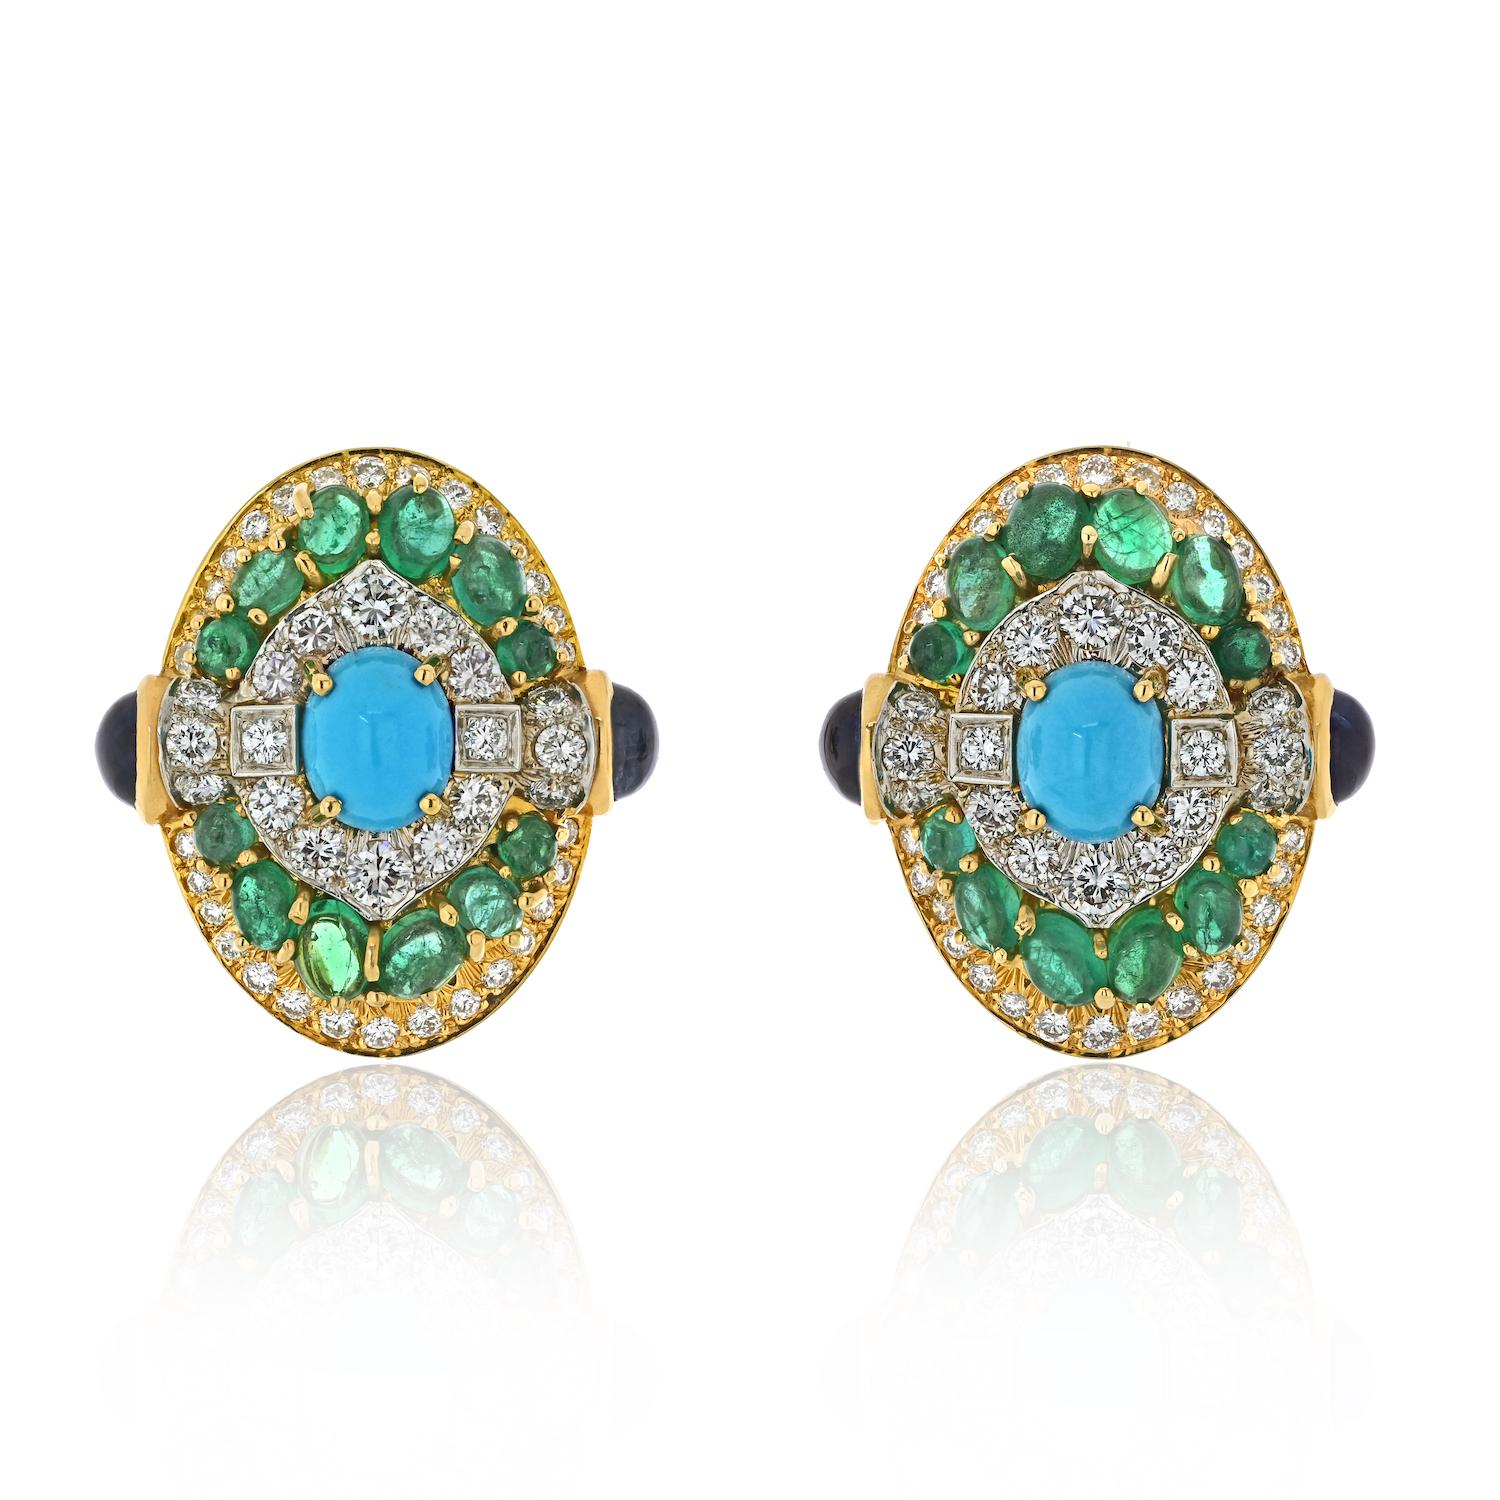 Step into a world of vibrant opulence with these magnificent David Webb 18k yellow gold clip earrings. 

Exuding the brand's signature boldness and artistry, these earrings are a true testament to David Webb's unparalleled craftsmanship.

Measuring